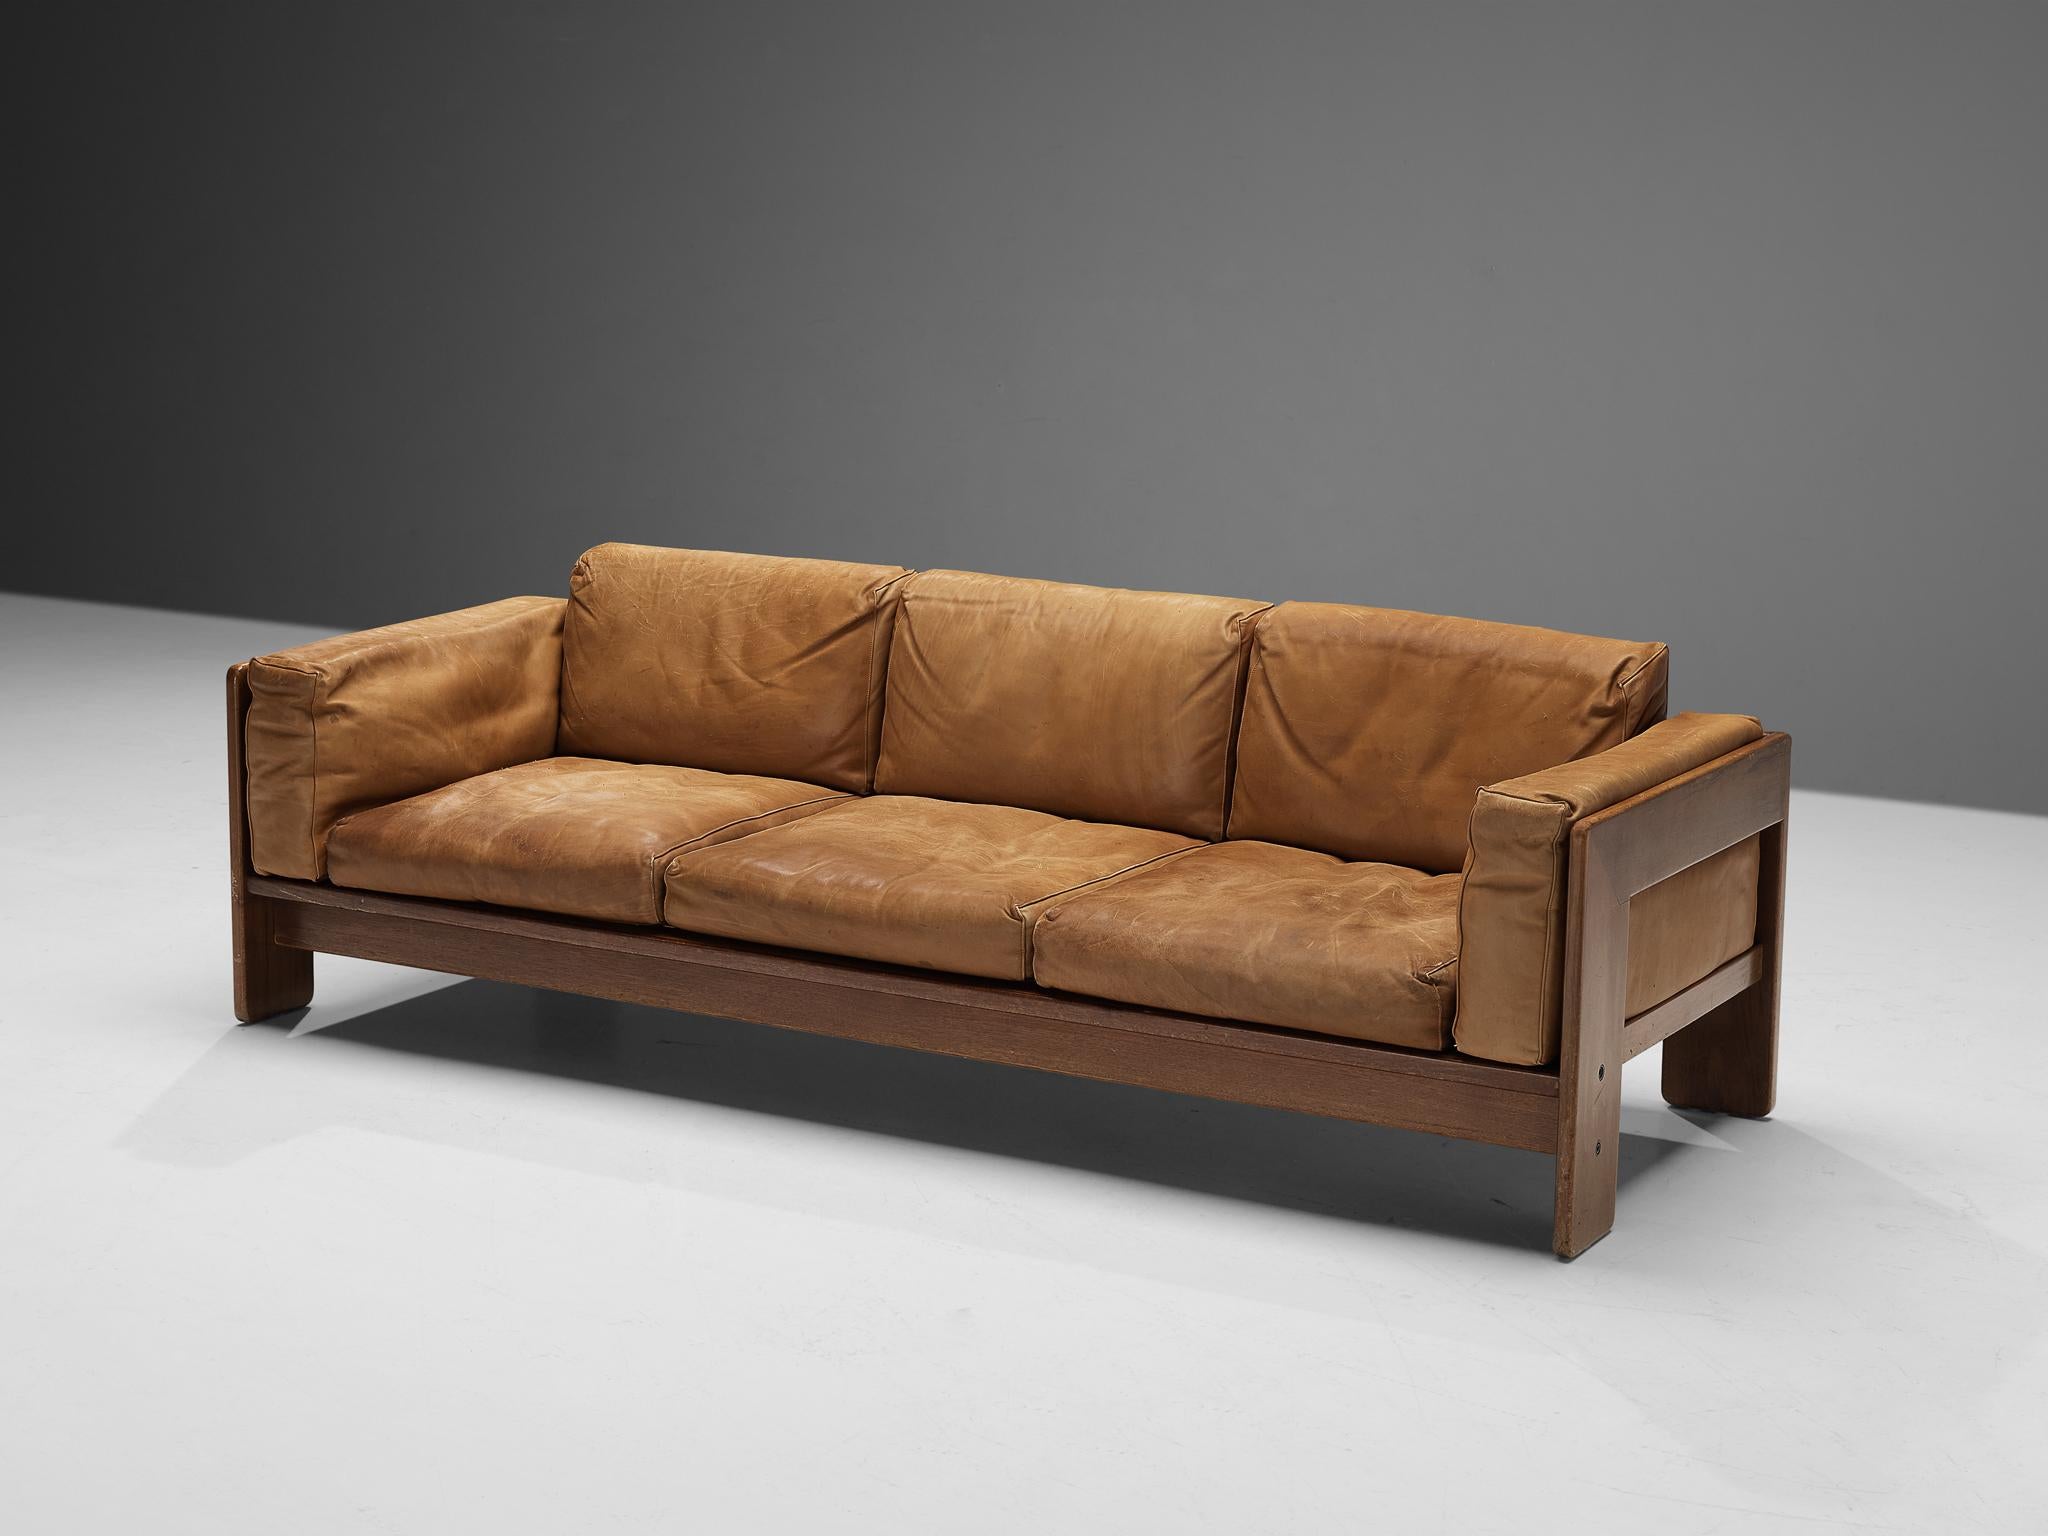 Tobia Scarpa for Gavina, 'Bastiano' sofa, leather and walnut, Italy, design 1960, manufactured between 1969-1970s

This delicate Bastiano sofa truly intensifies the experience of sitting itself and is a standout in any modern room. Tobia Scarpa